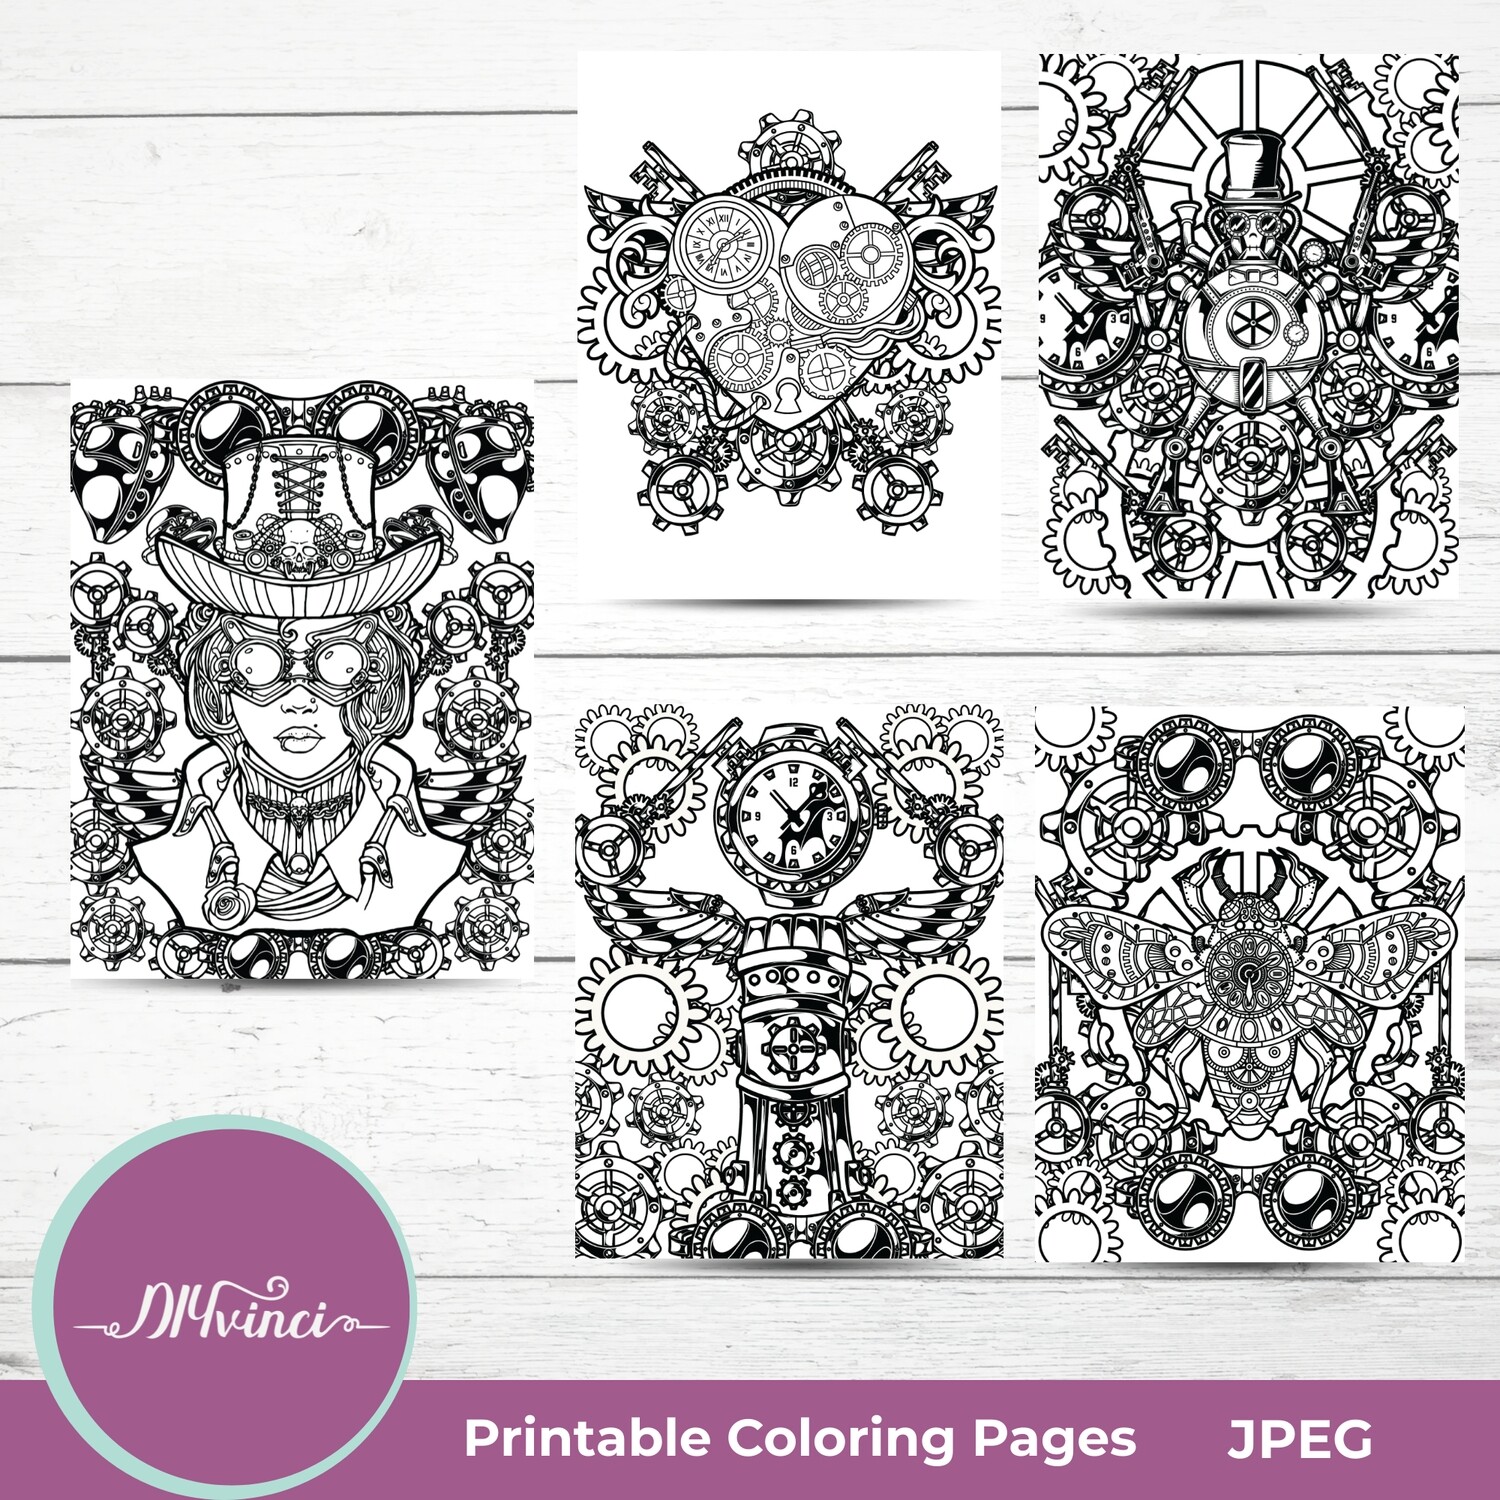 5 Steampunk Printable Coloring Pages - PNG - Personal and Commercial Use